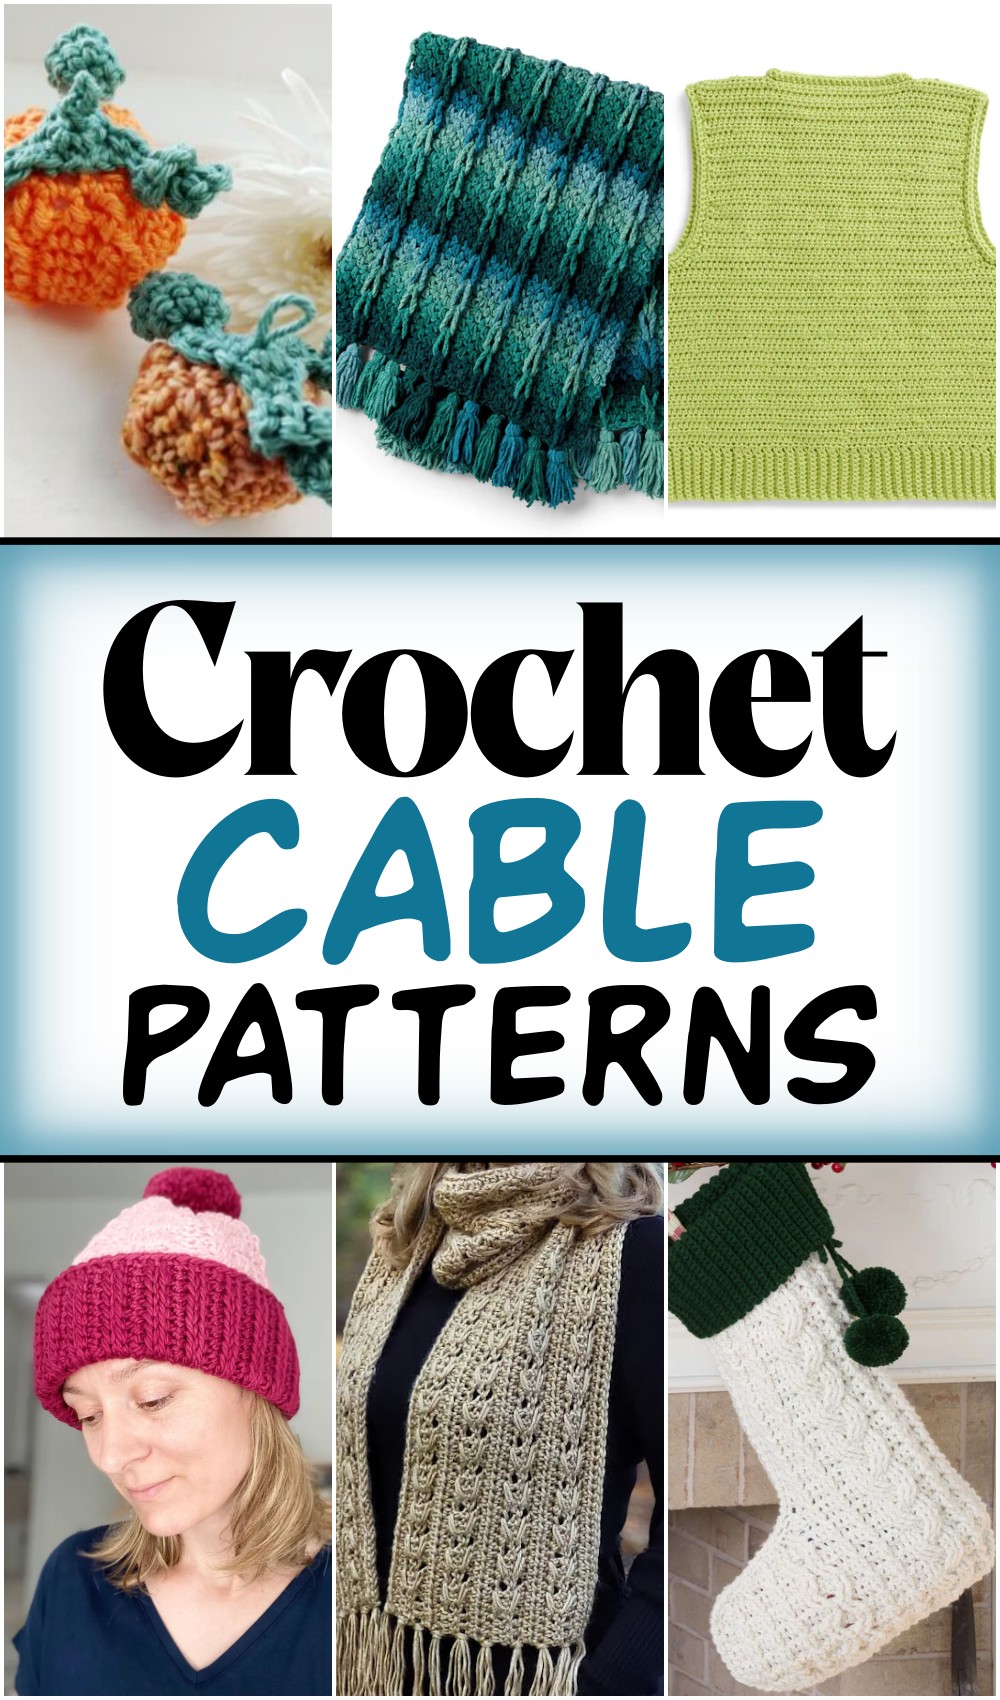 Crochet Cable Patterns